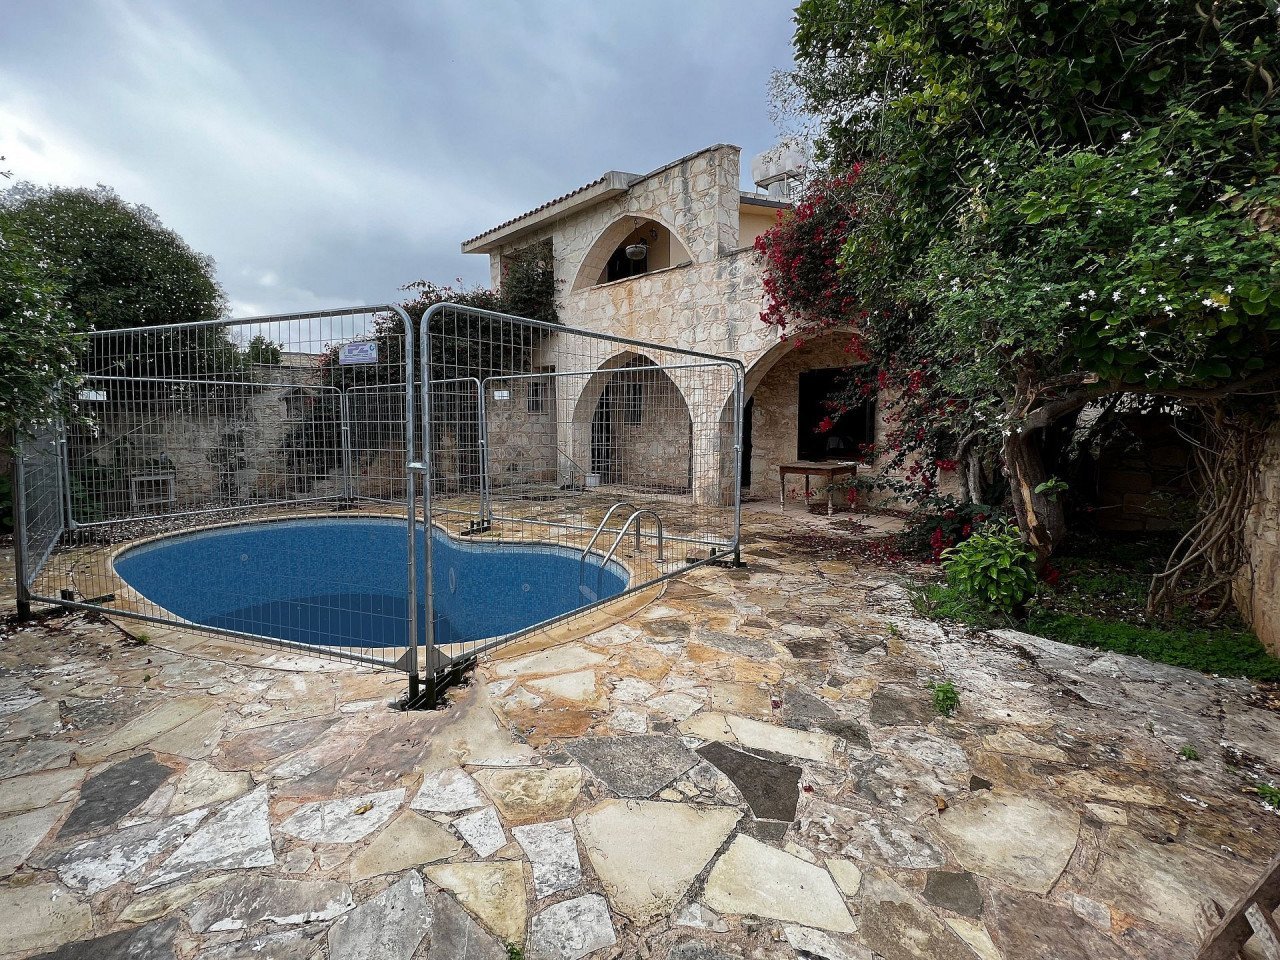 Property for Sale: House (Detached) in Neo Chorio, Paphos  | Key Realtor Cyprus